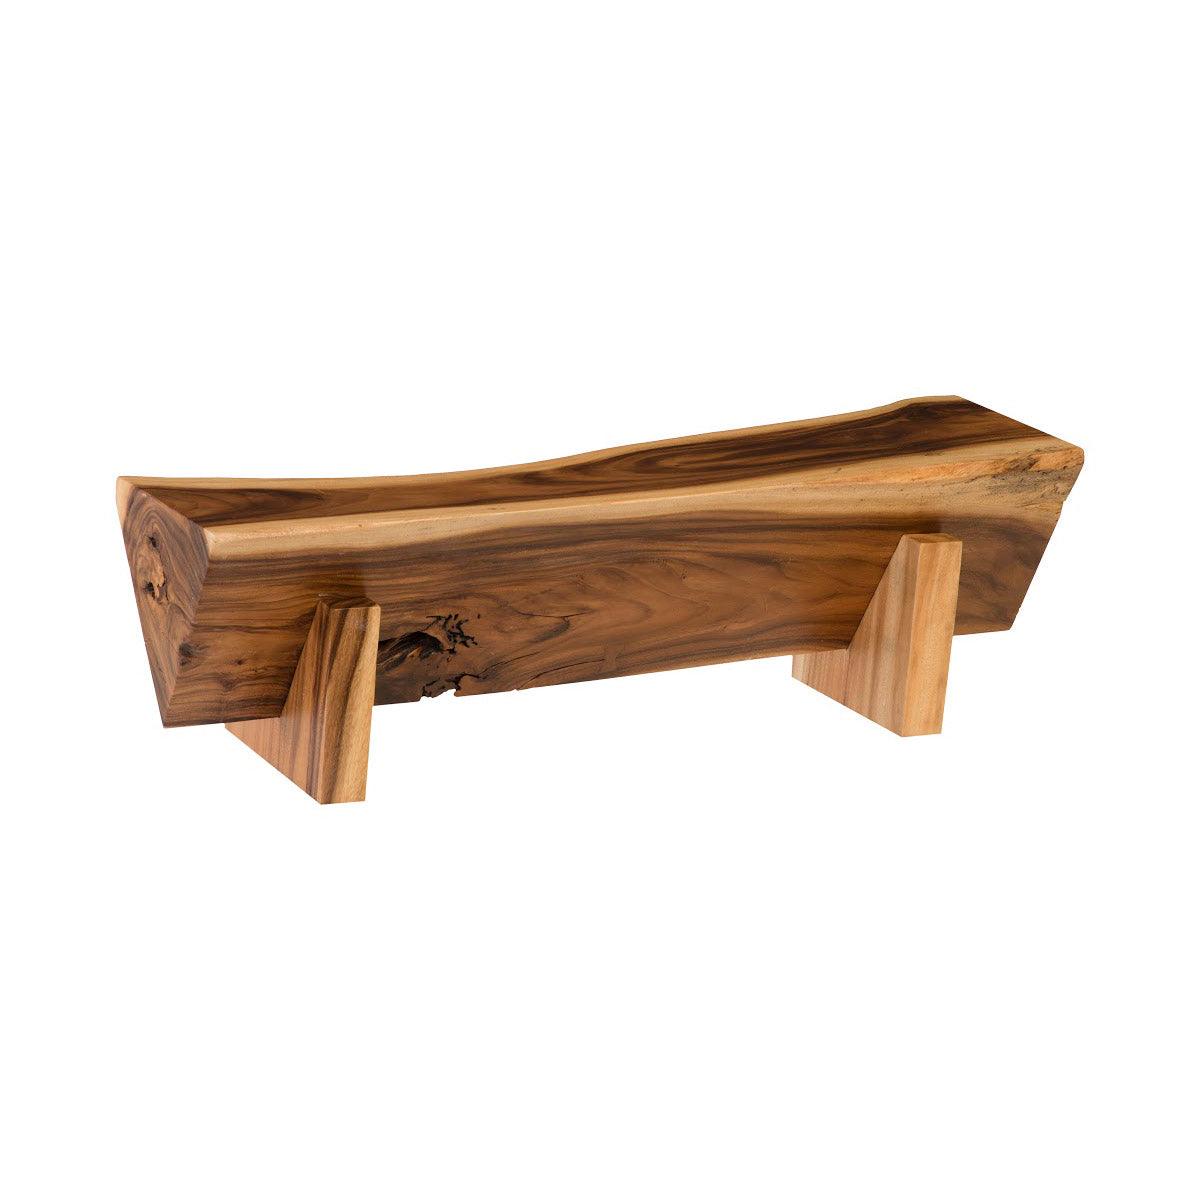 Phillips Collection FURNITURE - Triangle Bench